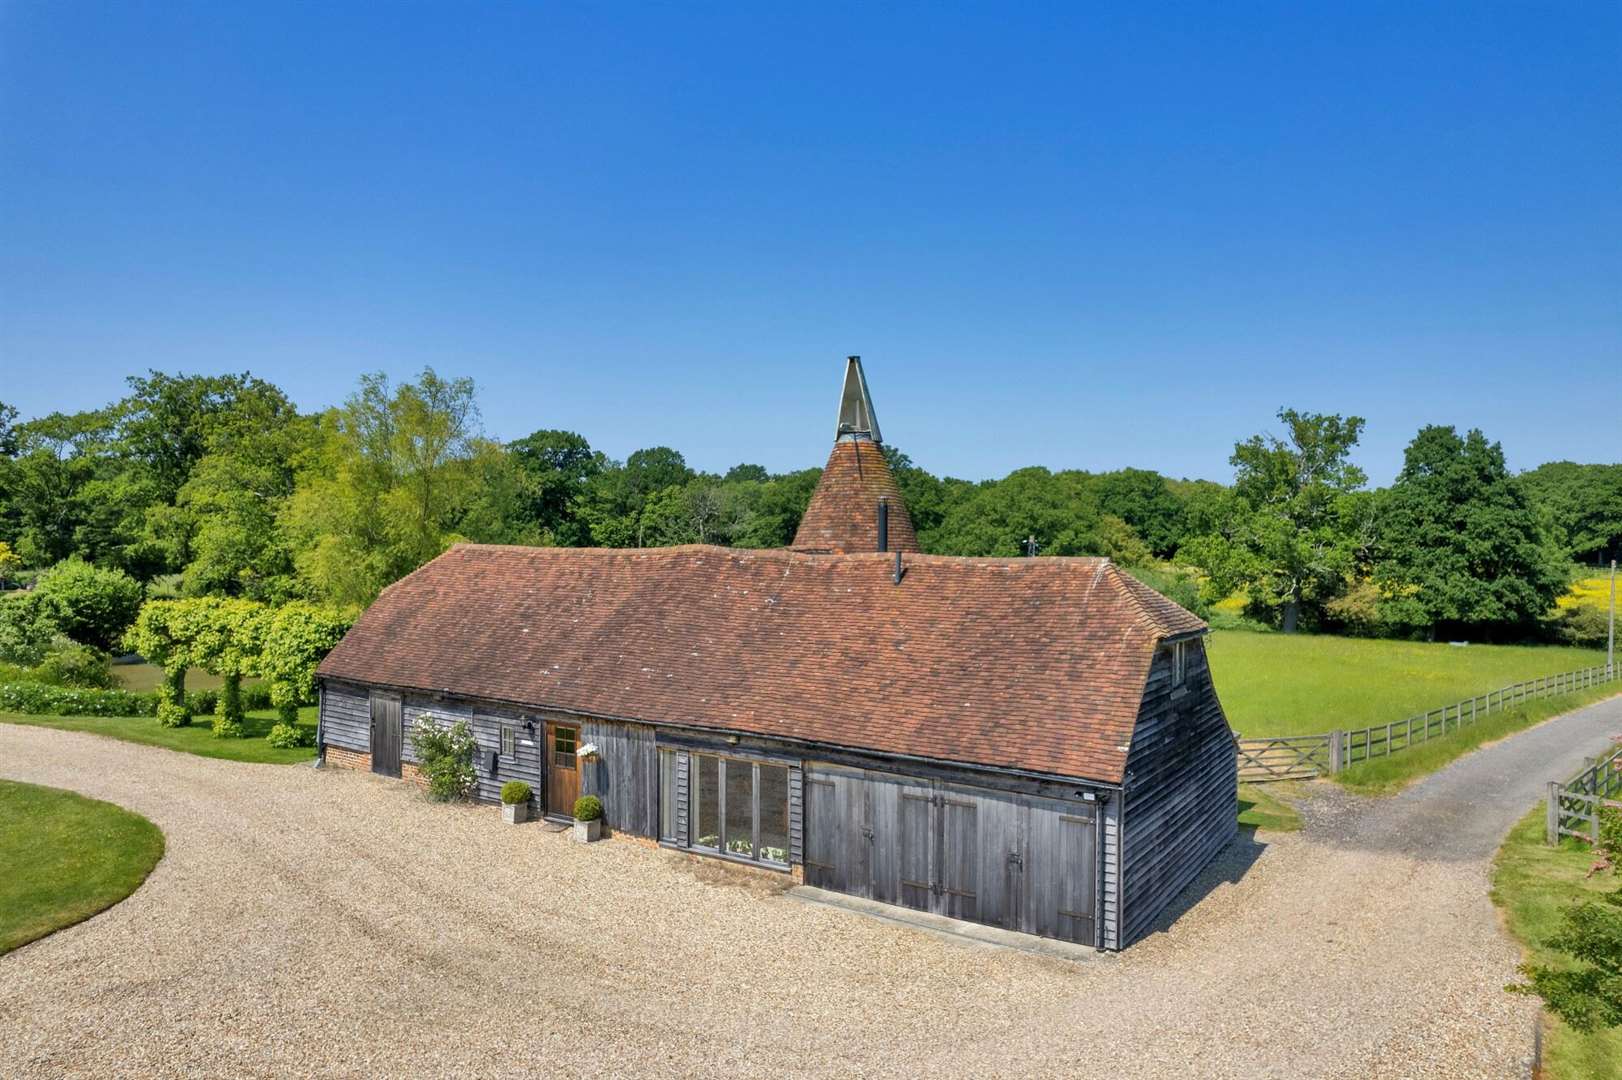 The manor on the outskirts of Biddenden, near Tenterden also features a three-bedroom oast, over 2000 sq ft in floorspace